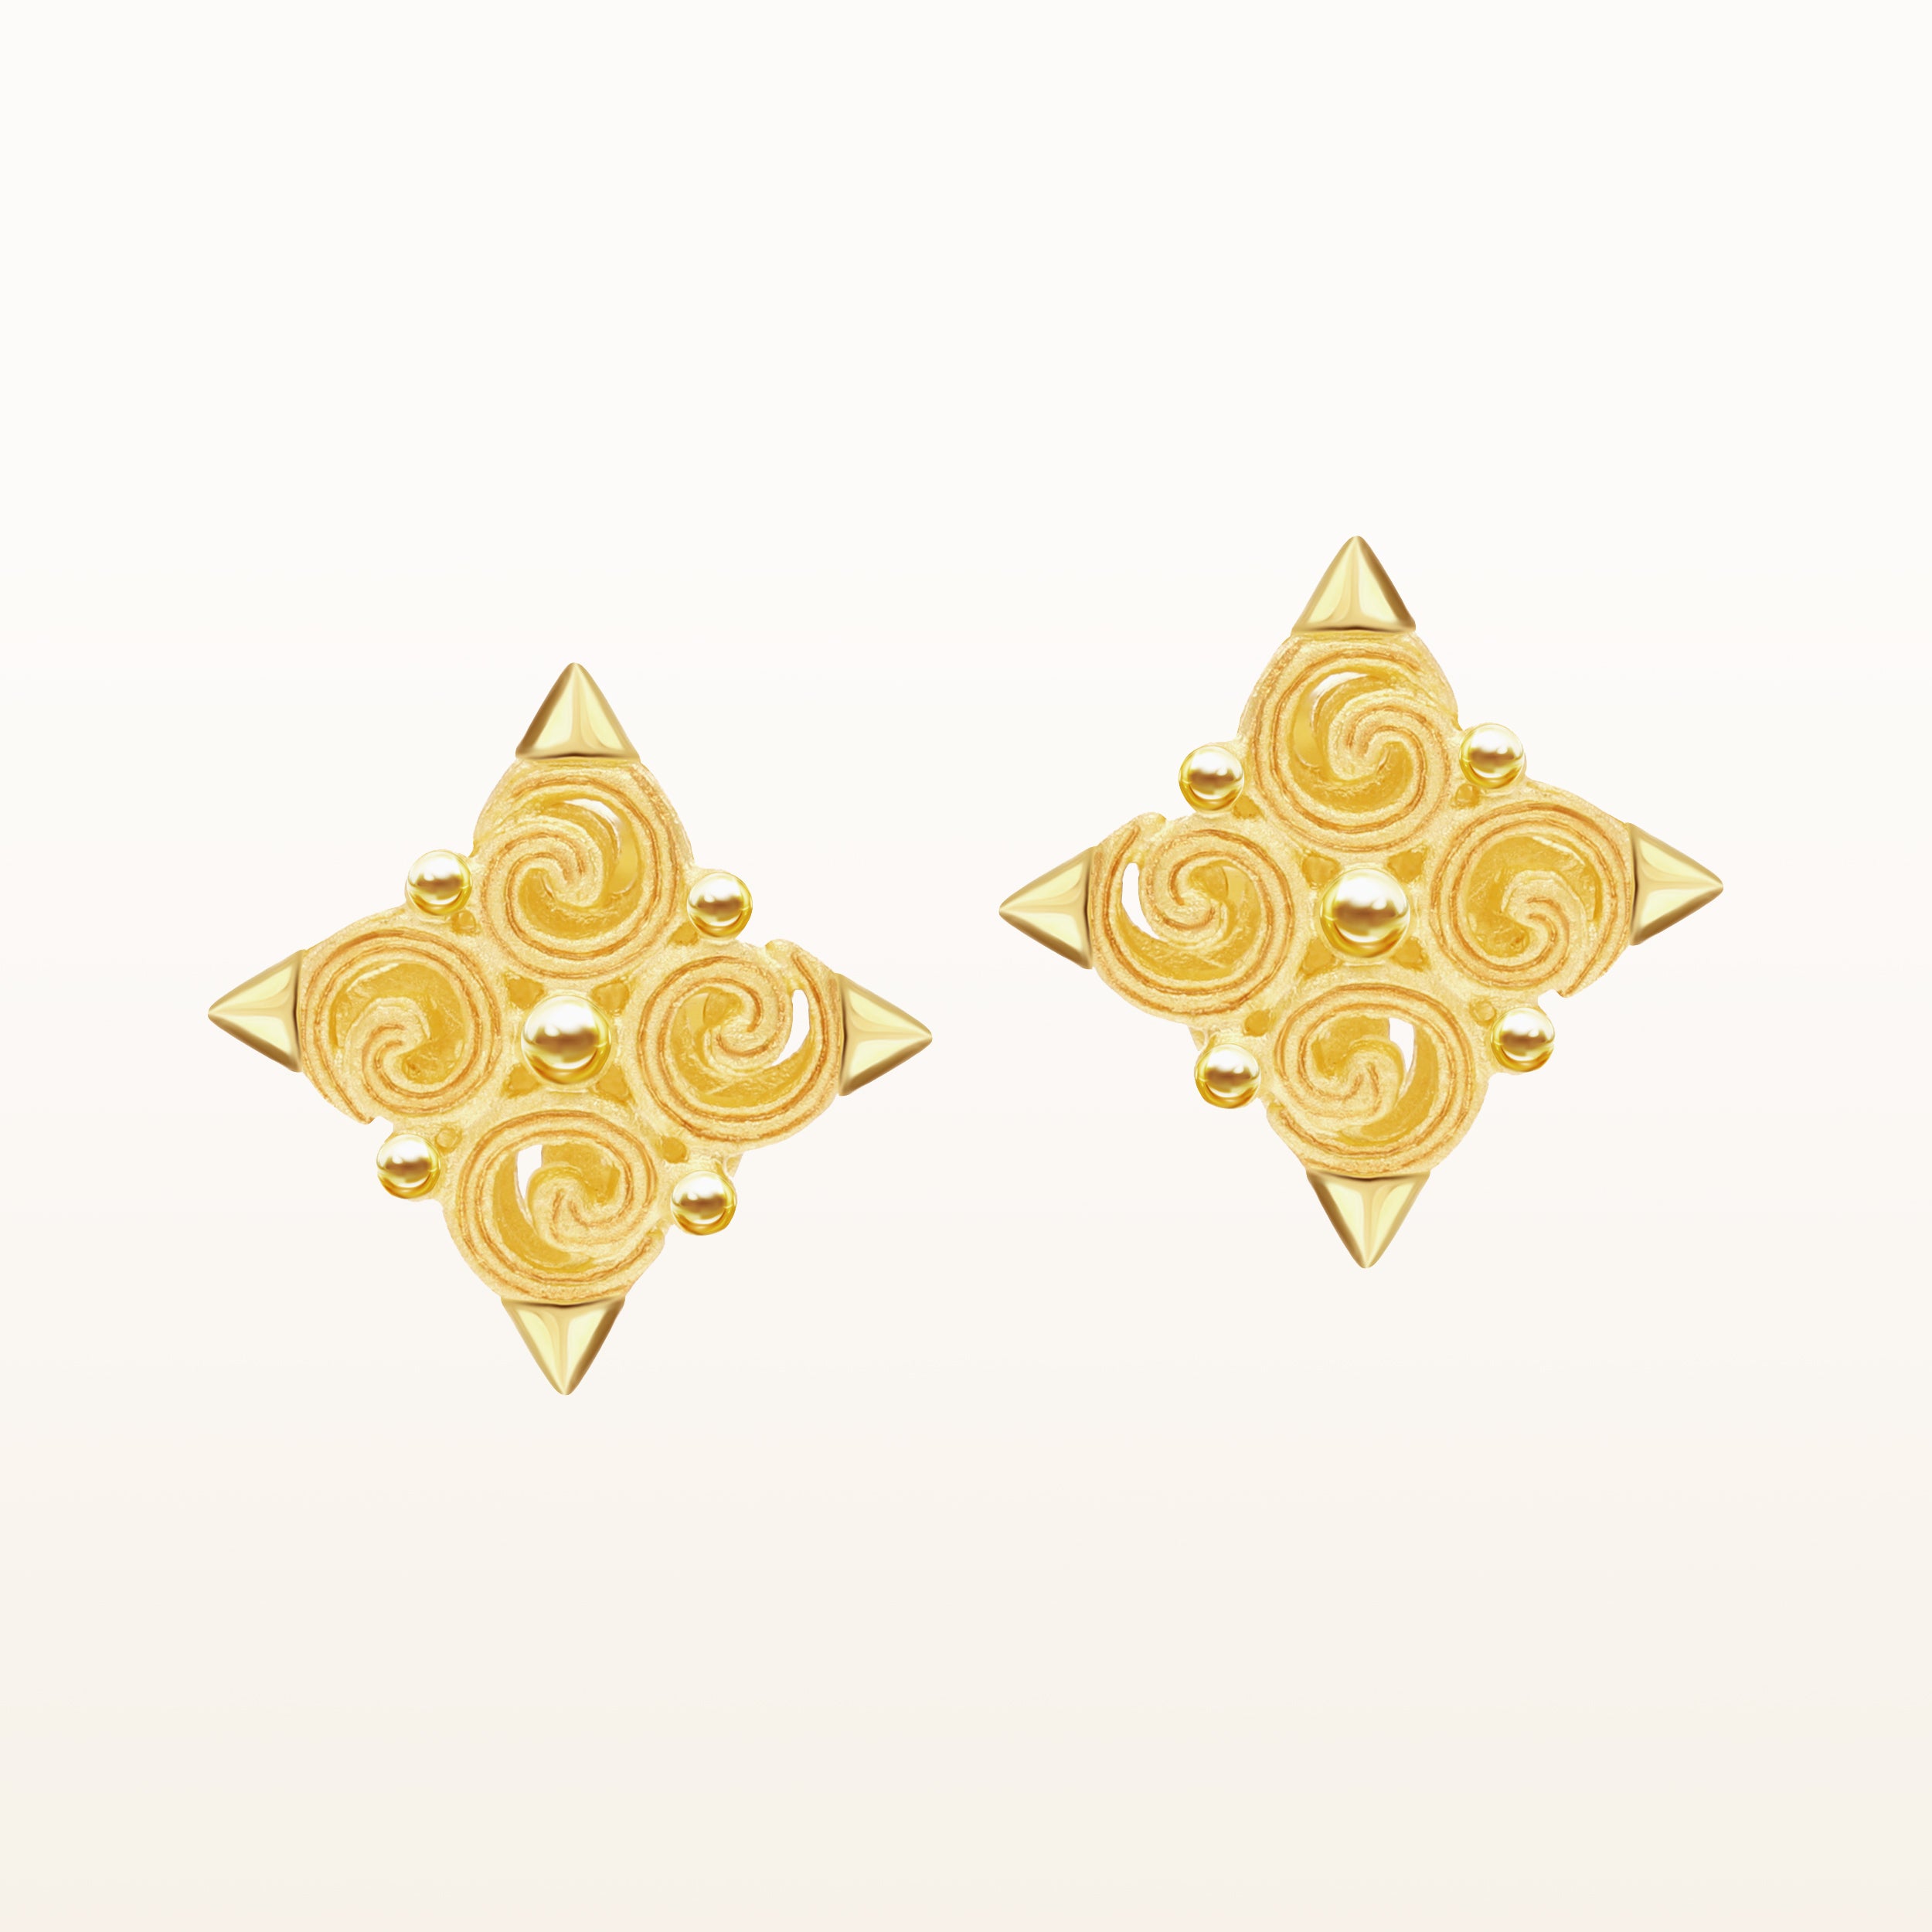 EARRINGS – Prima Gold Official